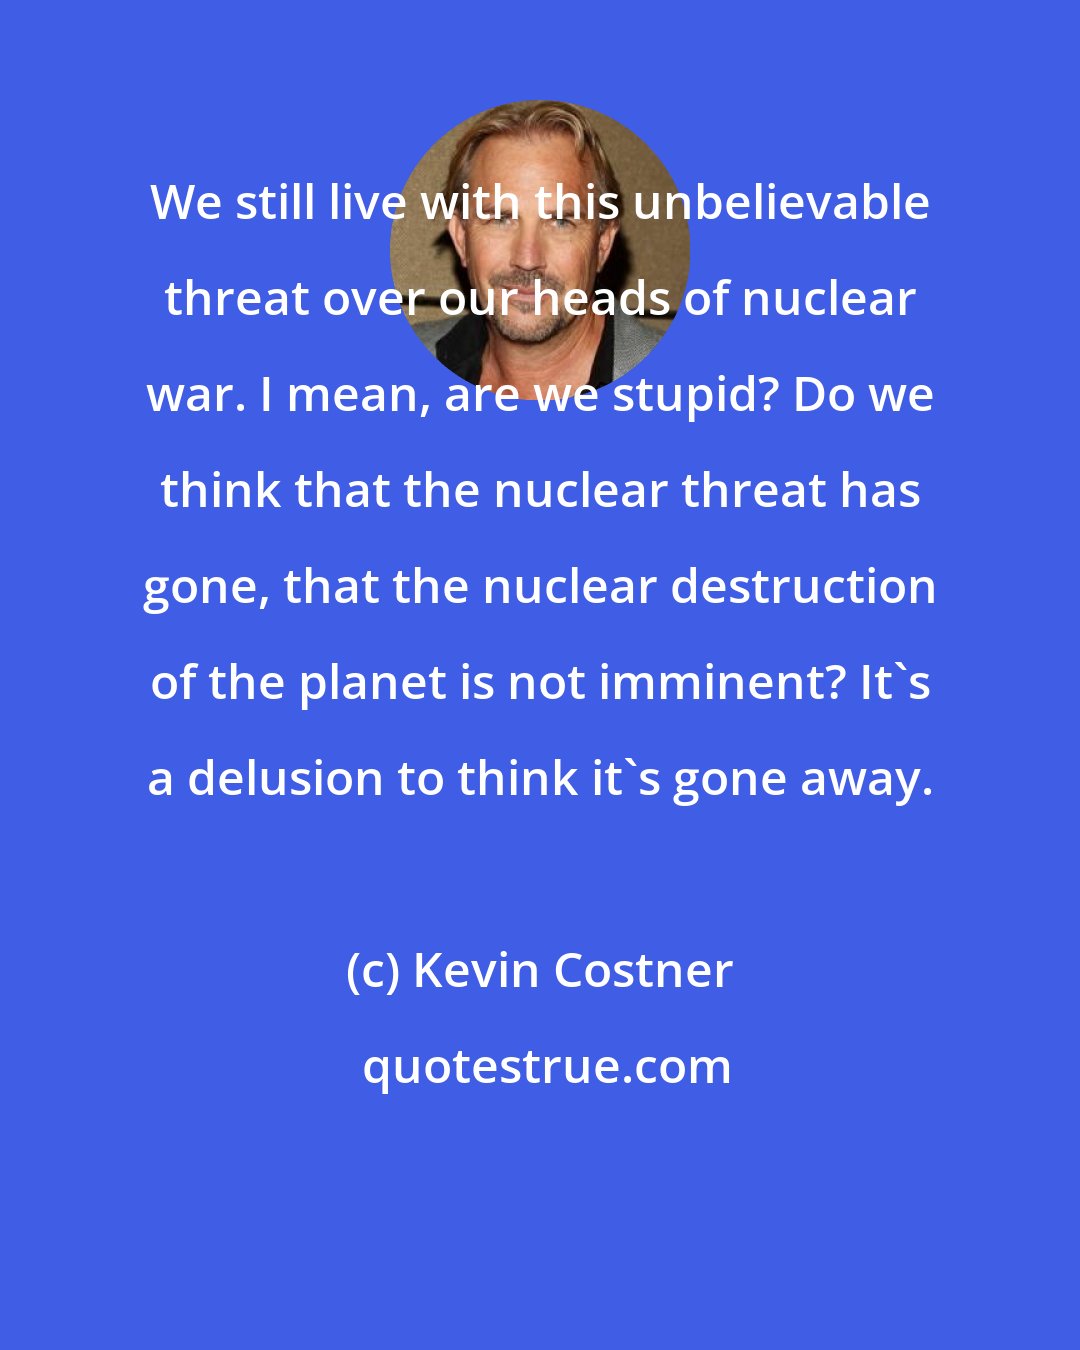 Kevin Costner: We still live with this unbelievable threat over our heads of nuclear war. I mean, are we stupid? Do we think that the nuclear threat has gone, that the nuclear destruction of the planet is not imminent? It's a delusion to think it's gone away.